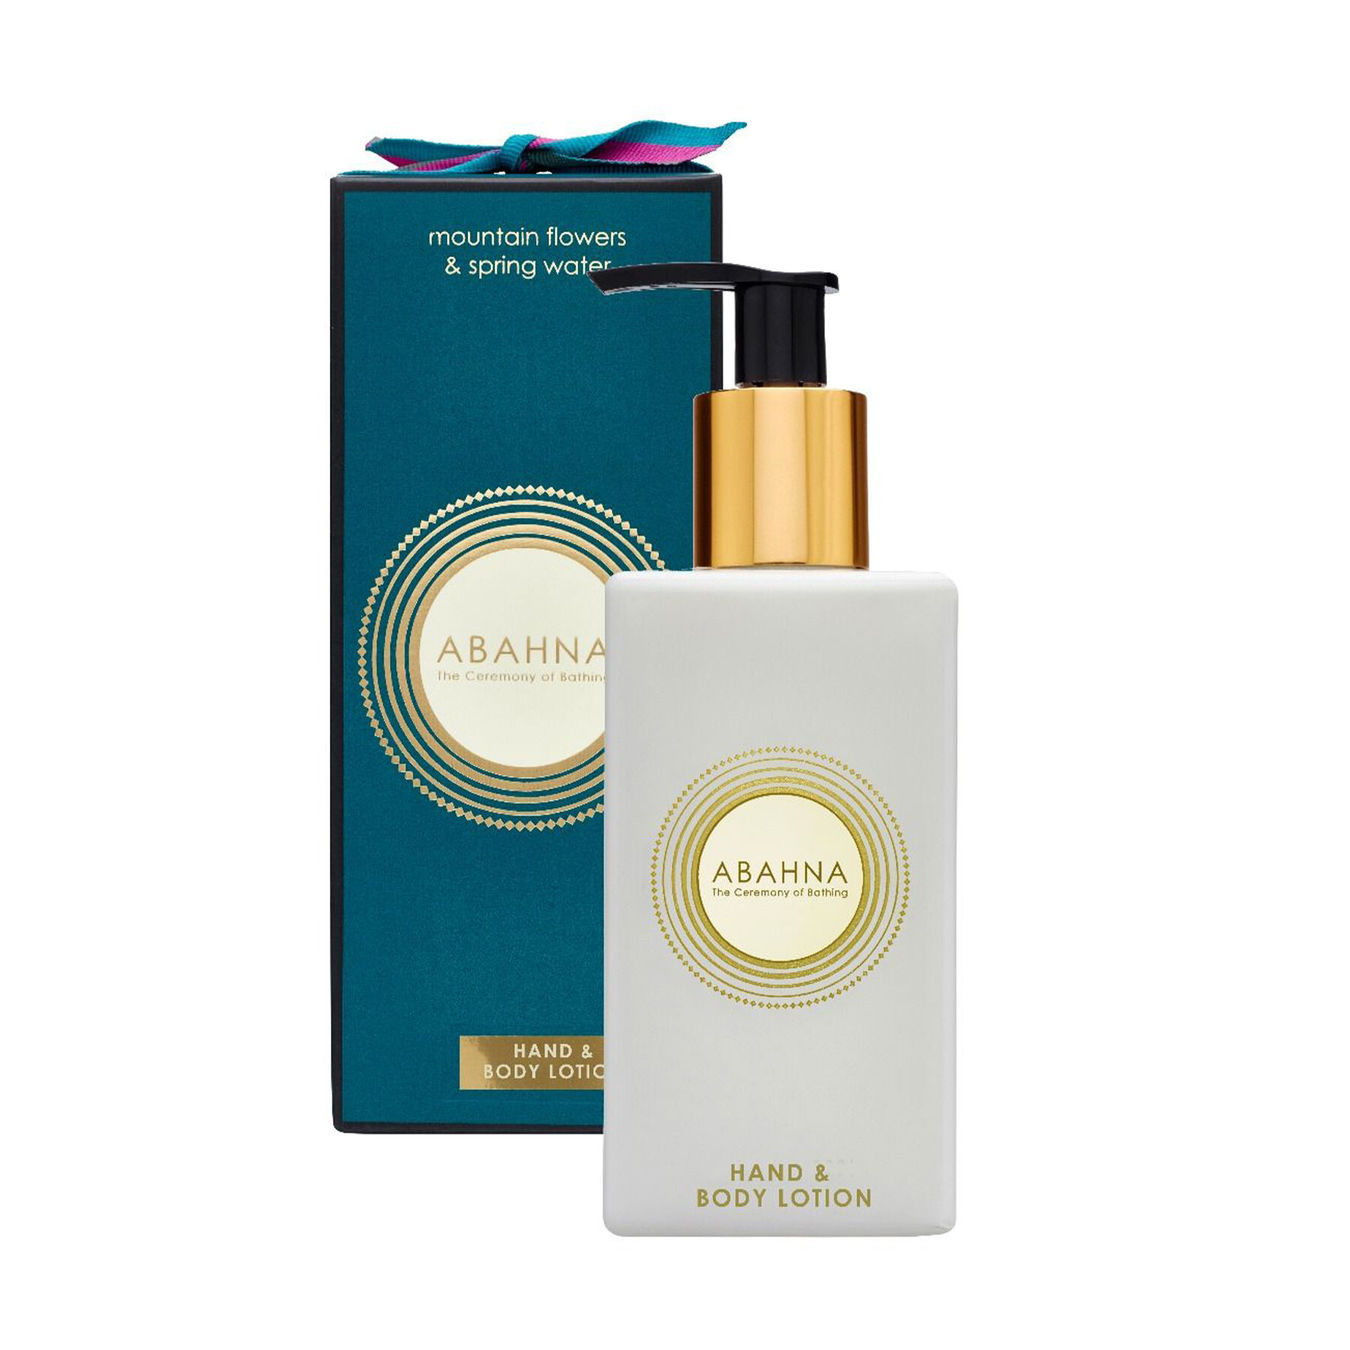 ABAHNA Mountain Flowers & Spring Water Hand & Body Lotion 250ml Donna